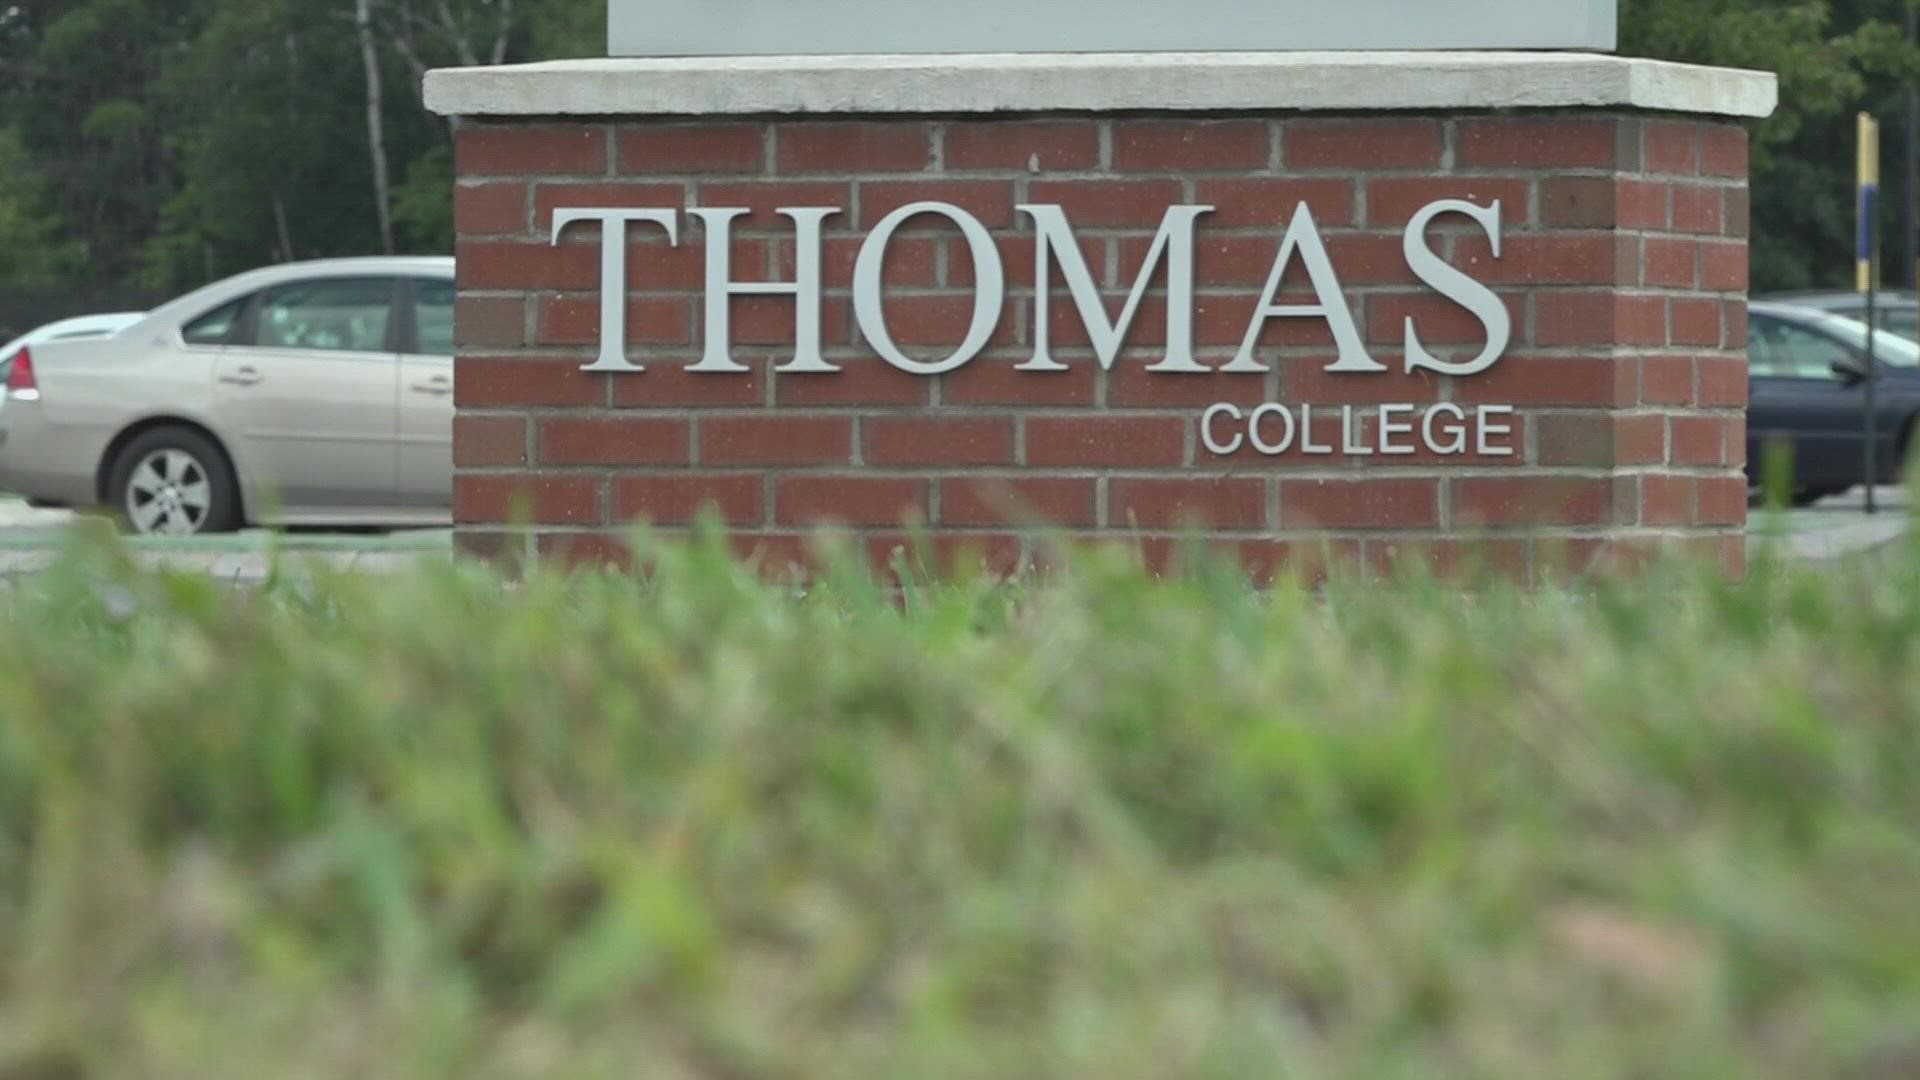 Thomas College will require all students, staff, and faculty to be fully vaccinated in order to attend classes on campus.